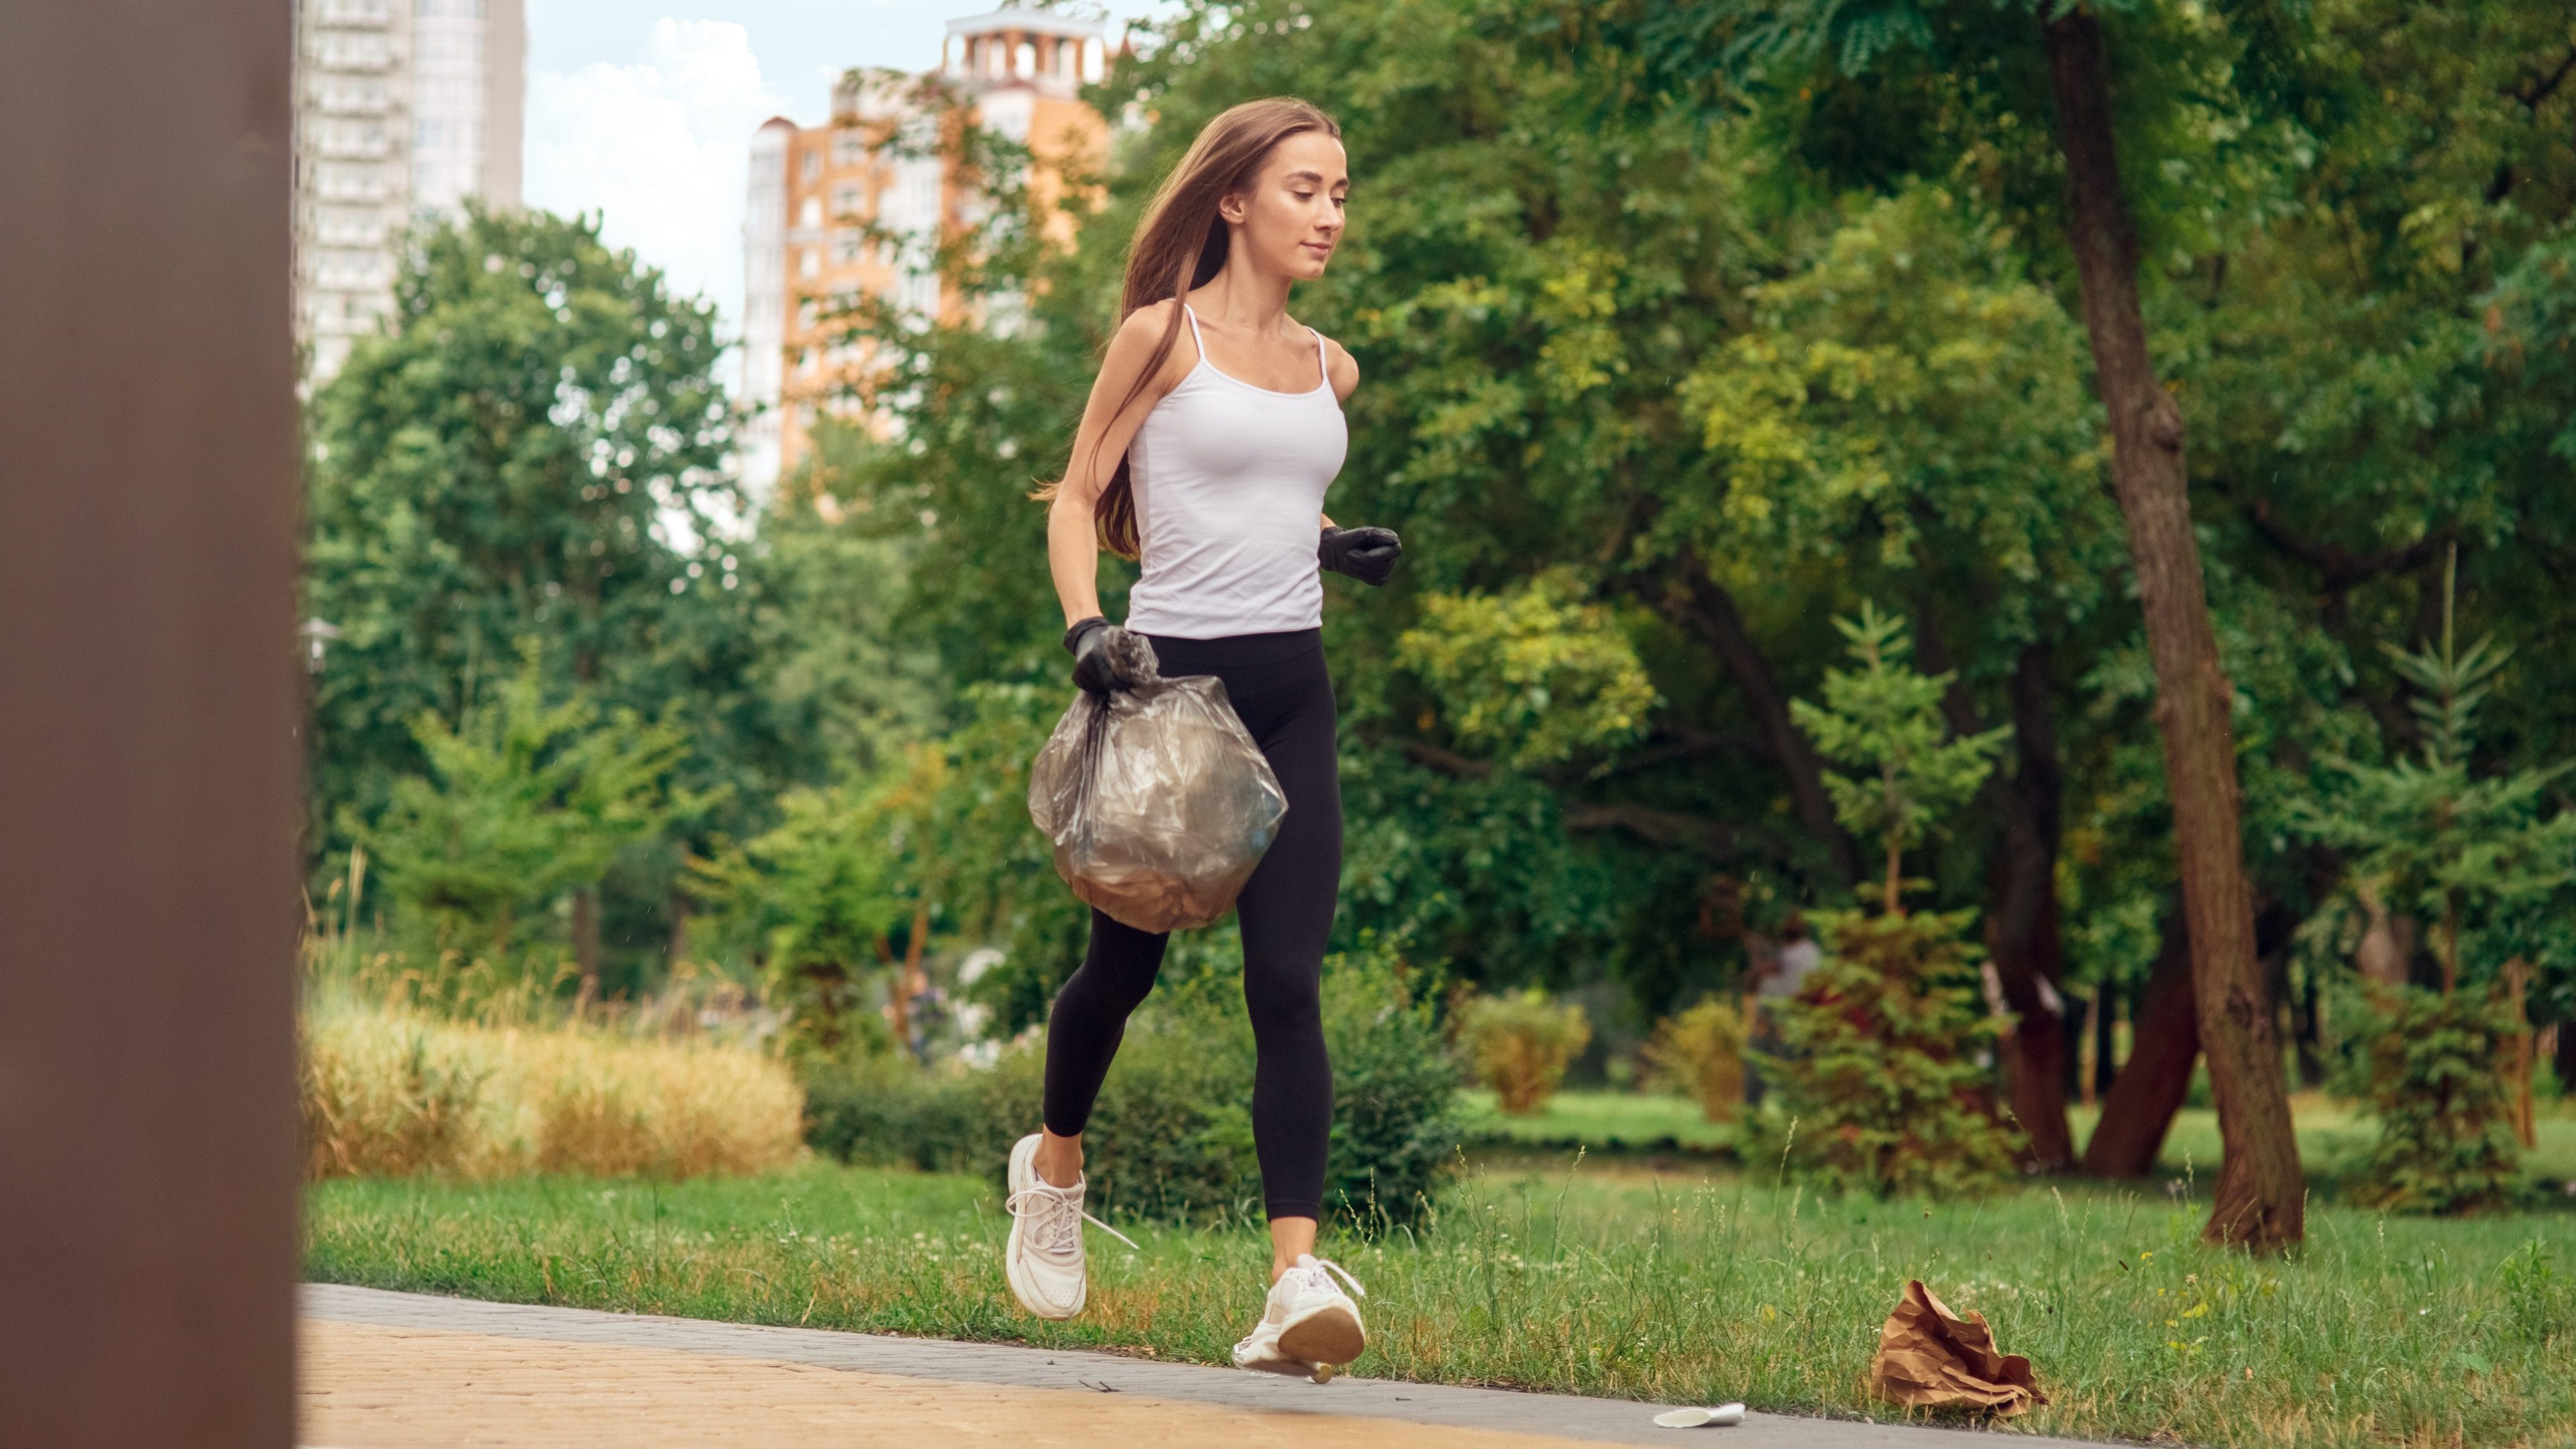 Young woman volunteer outdoors running wearing gloves in the park helping nature plogging holding plastic bag picking up litter smiling pensive